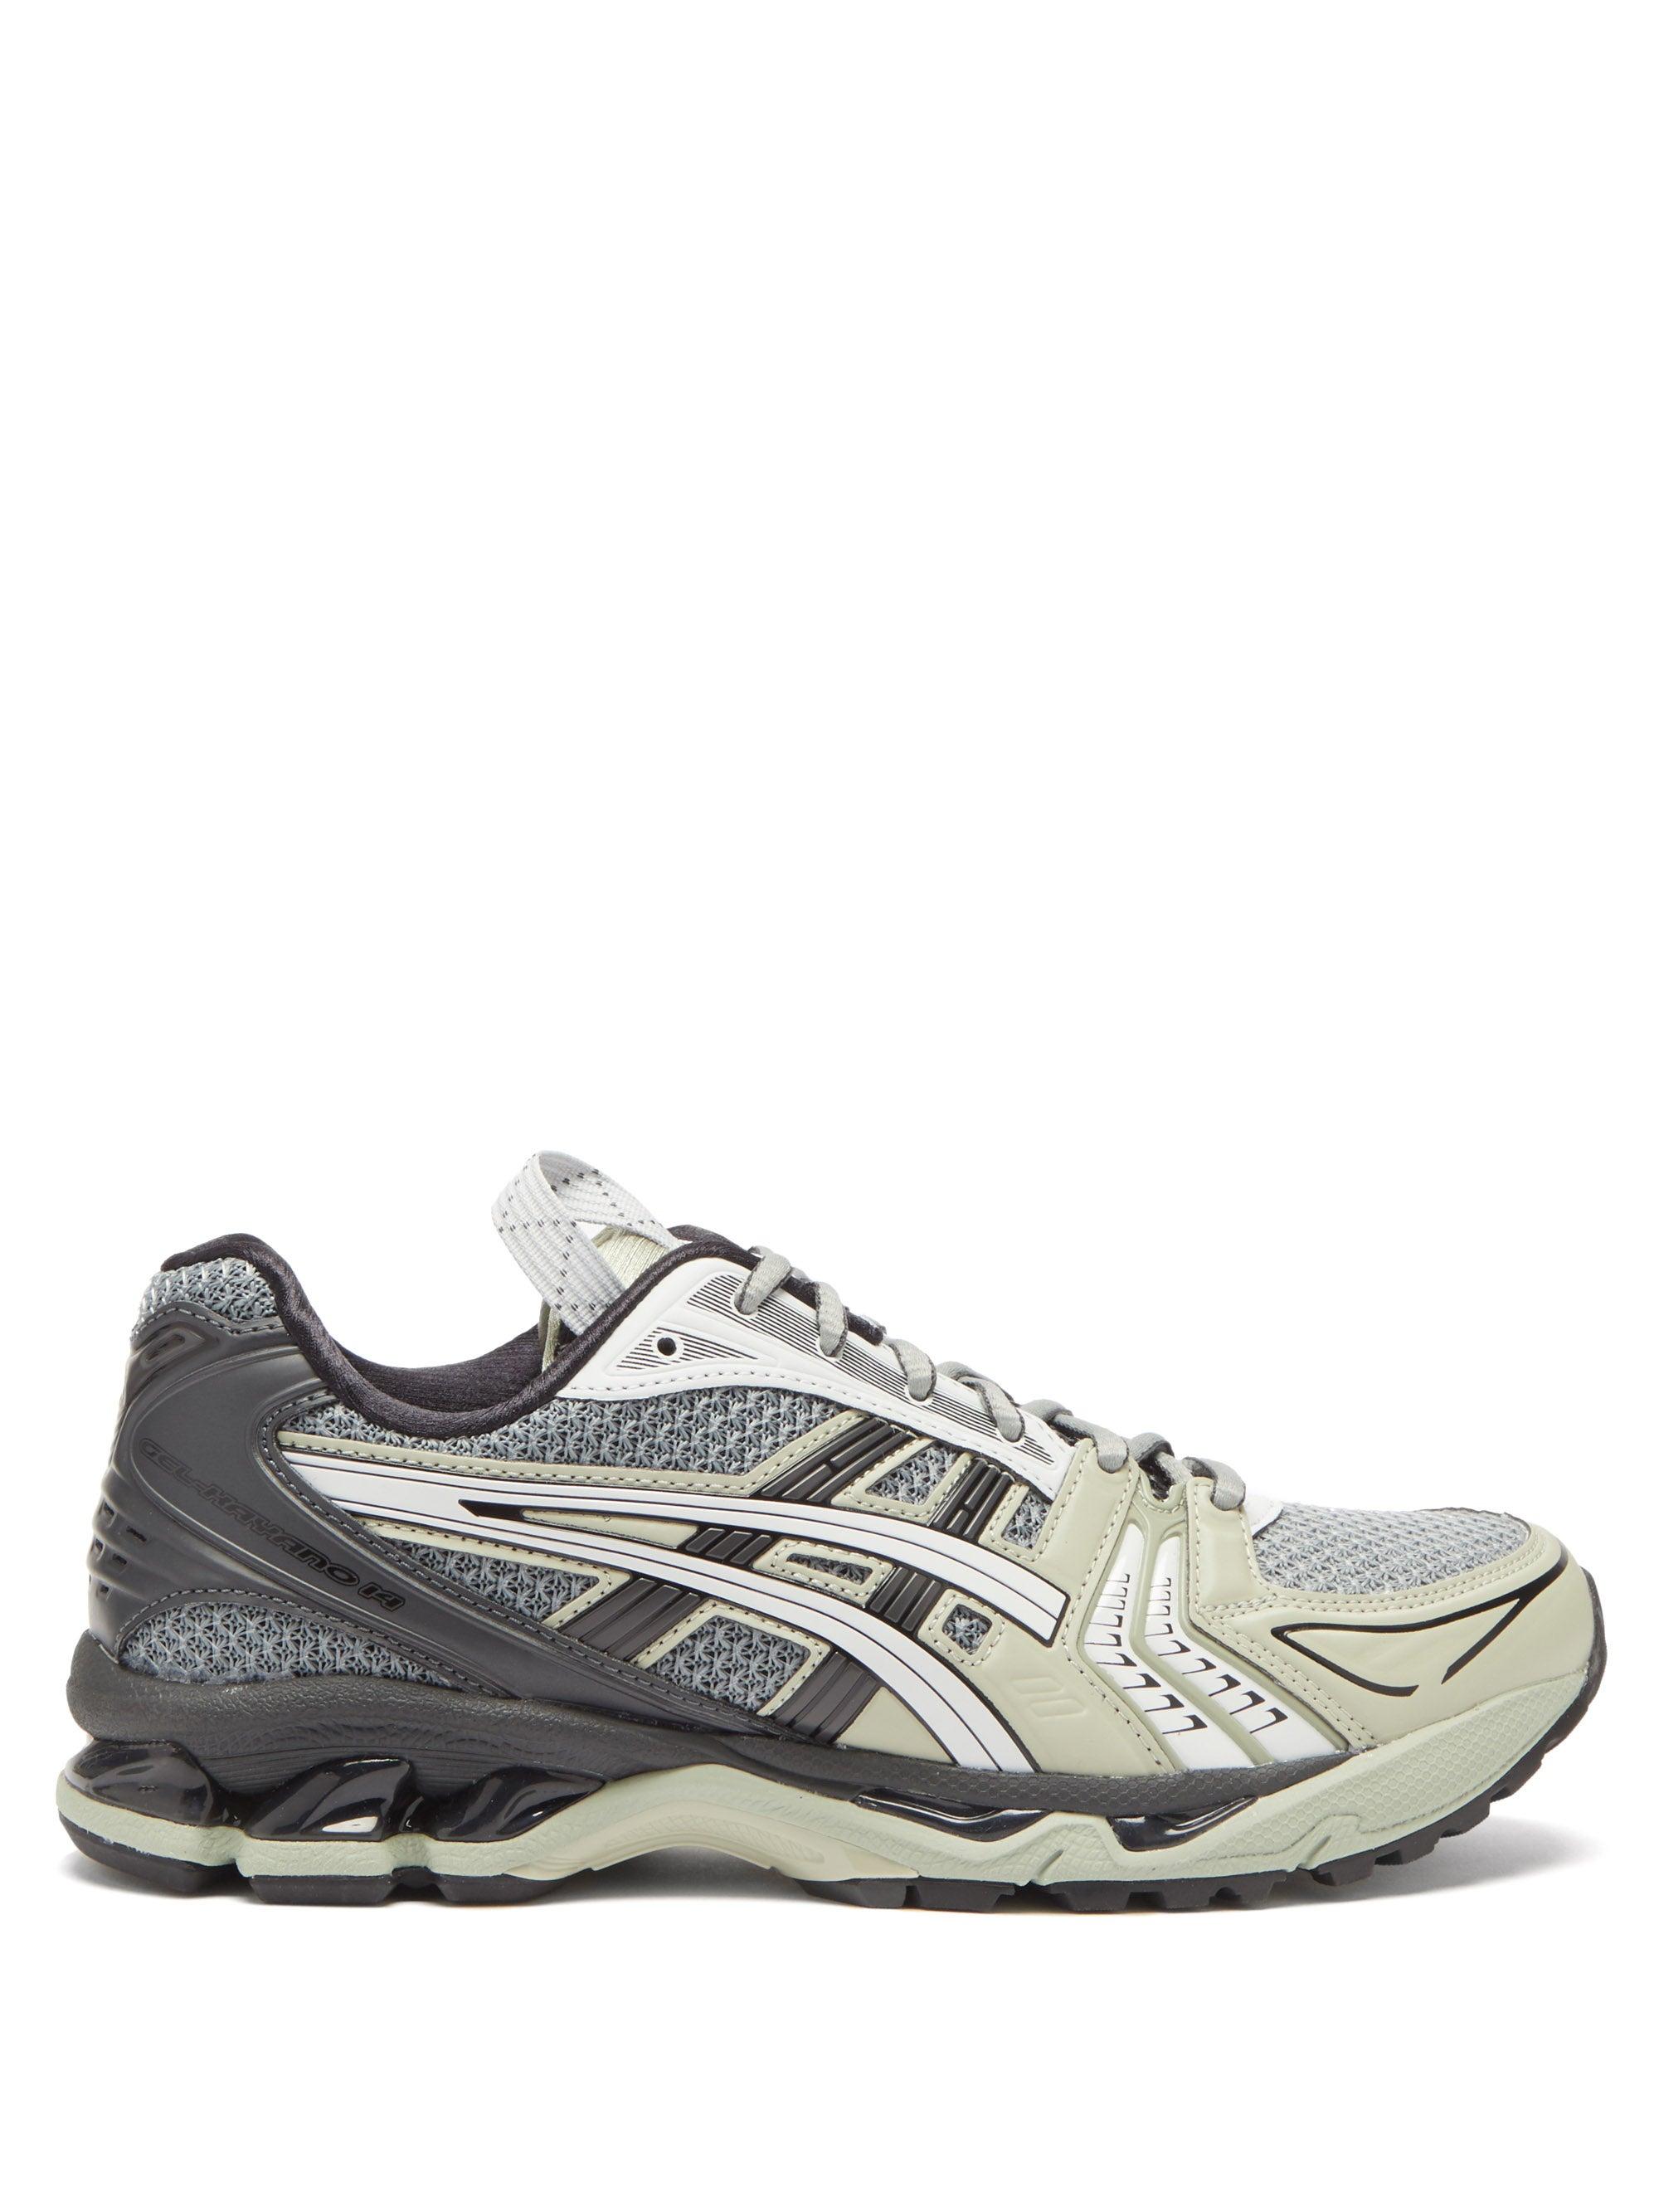 Asics Leather Gel-kayano 14 Mesh Trainers in Black Grey (Gray) - Lyst